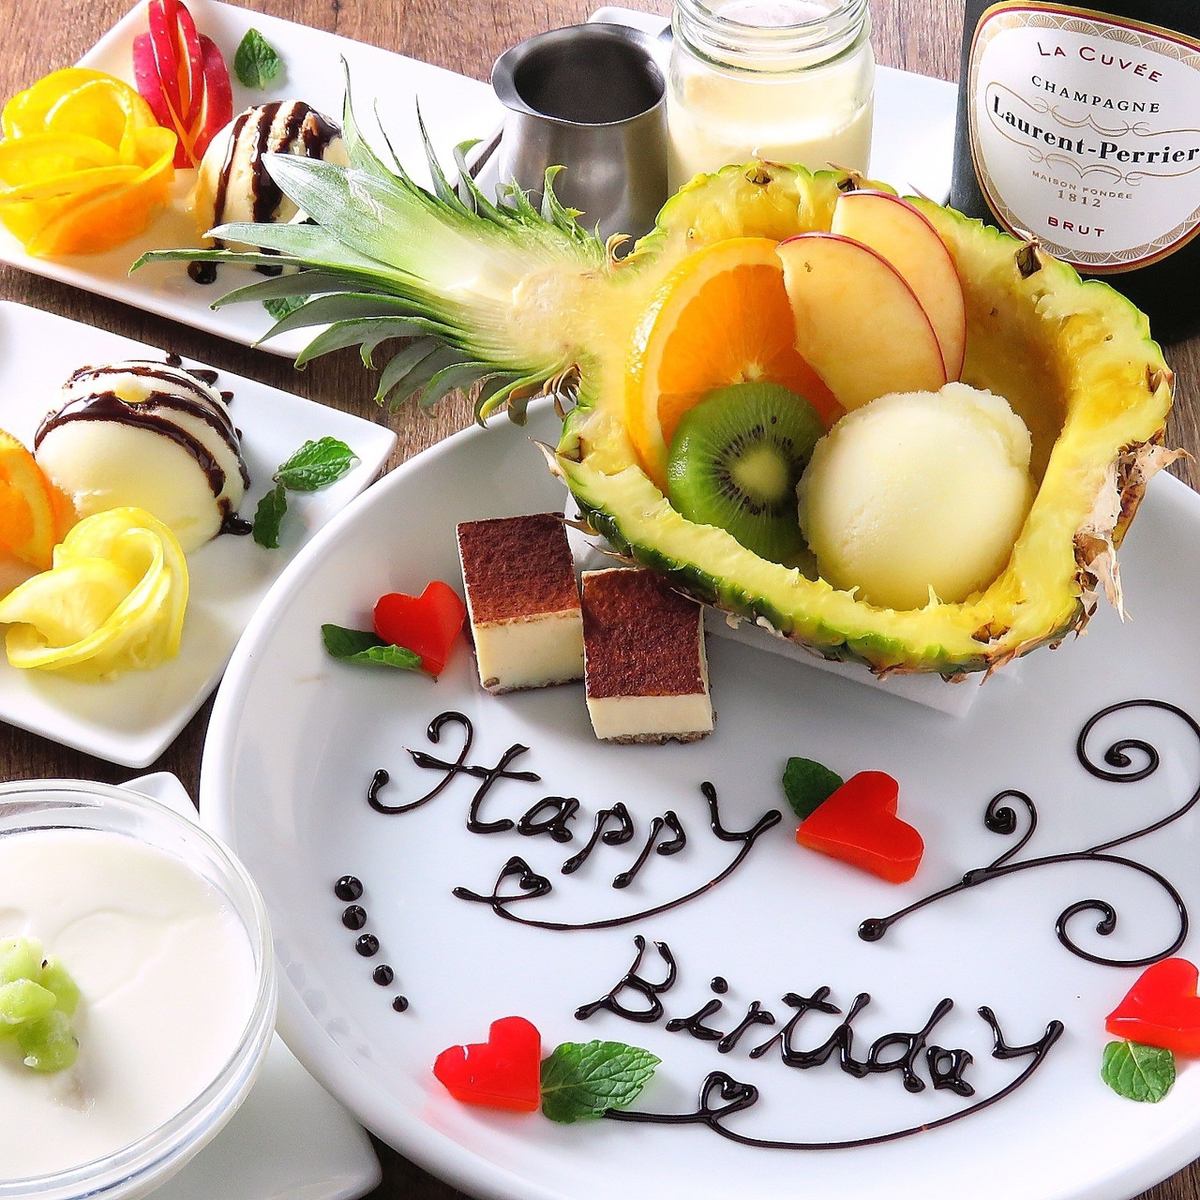 ☆★Birthday/Anniversary★☆ Celebrate with your loved ones! [Must-see coupon]